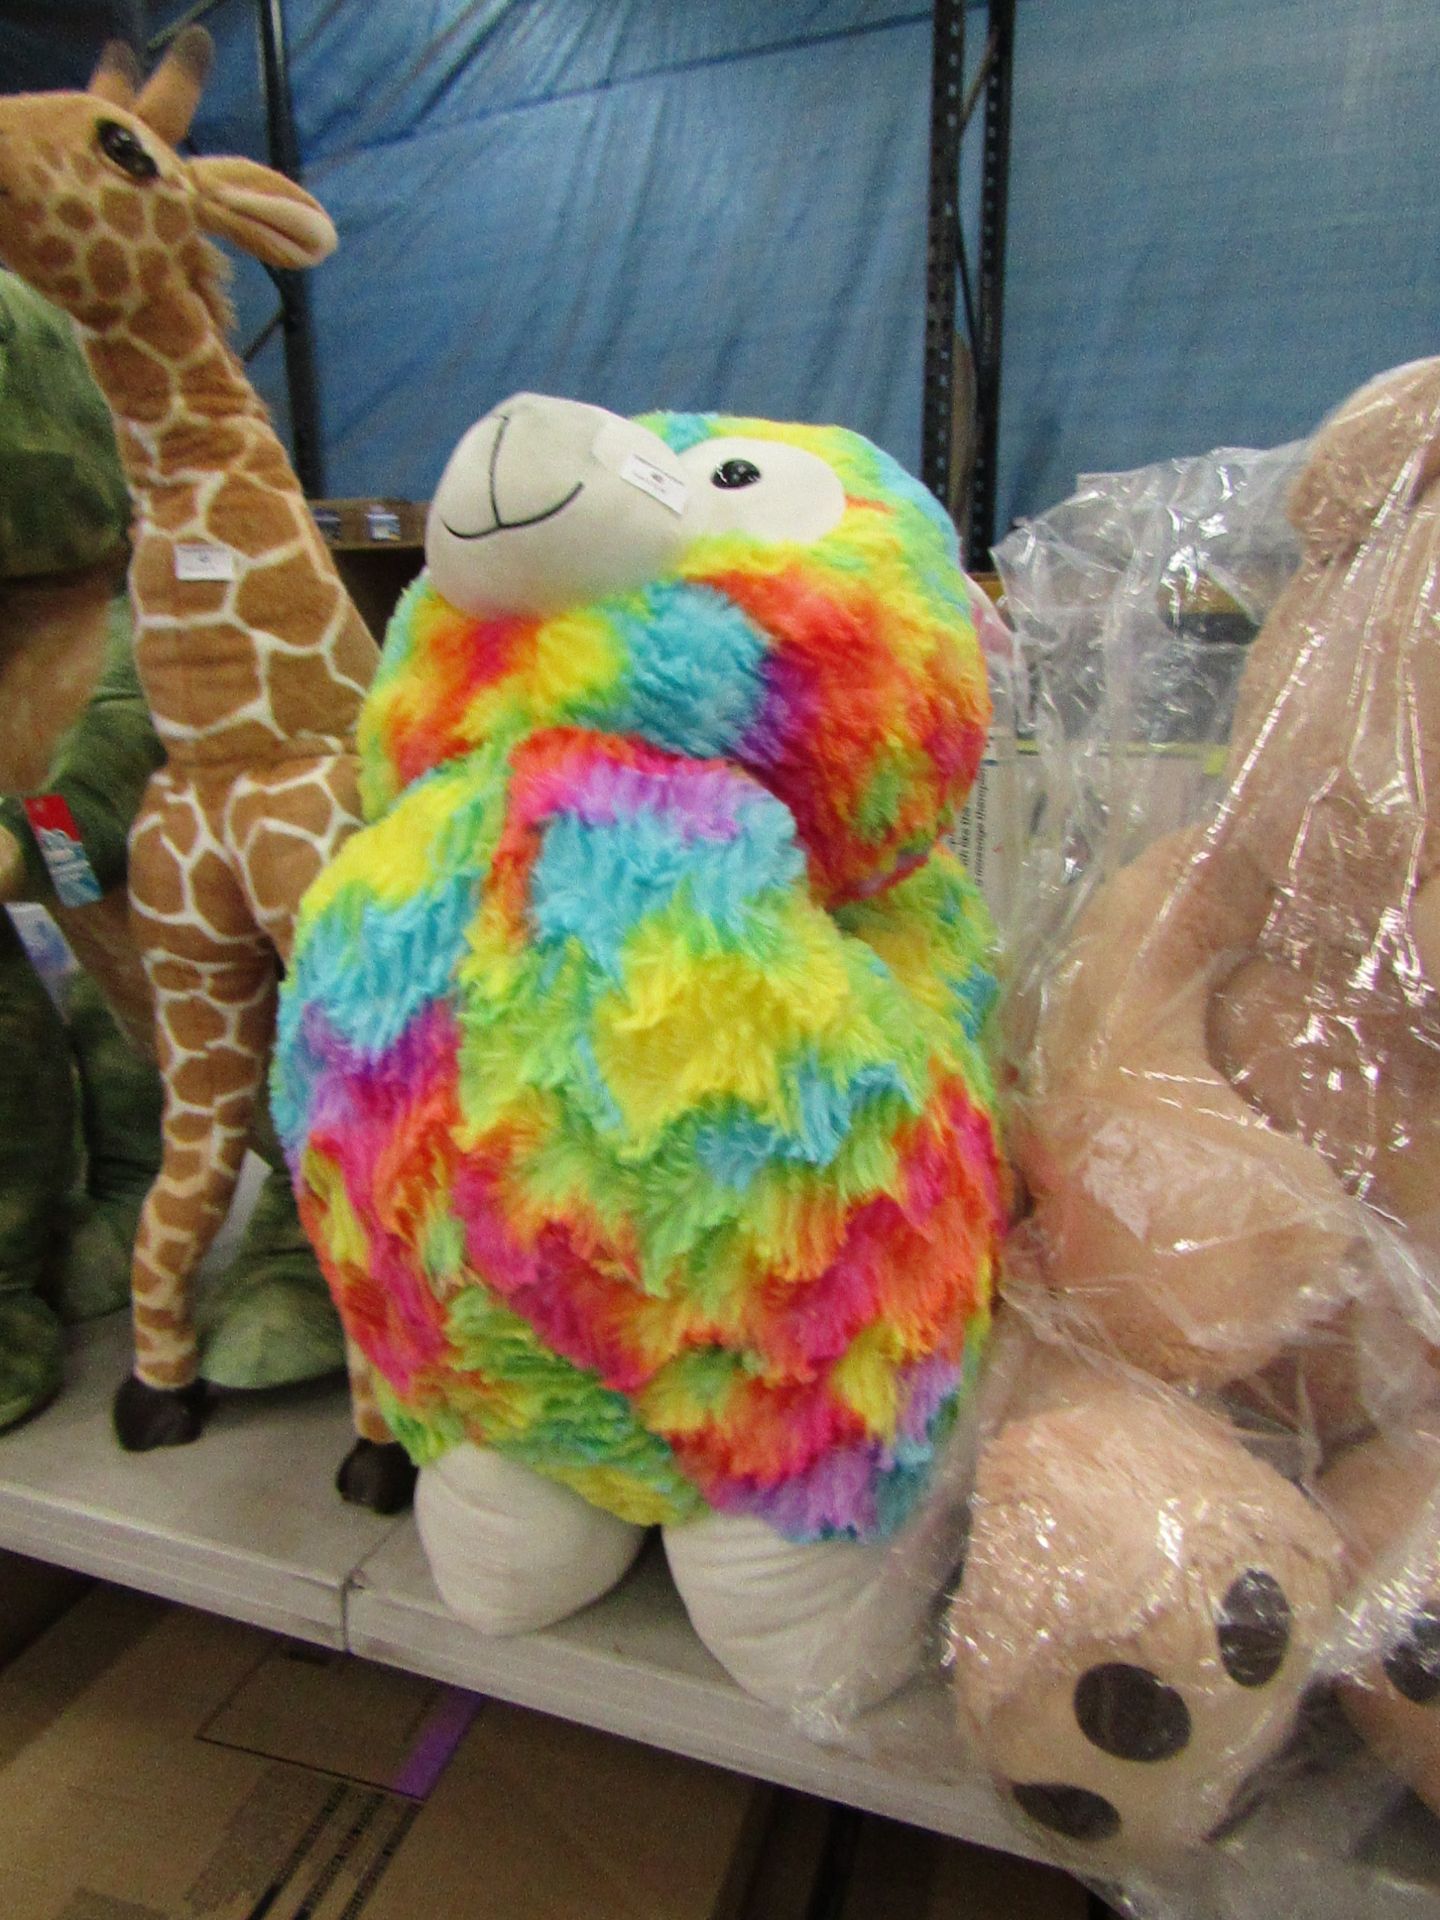 Giant Rainbow Alpaca, has dirt on its nose but could be easily cleaned